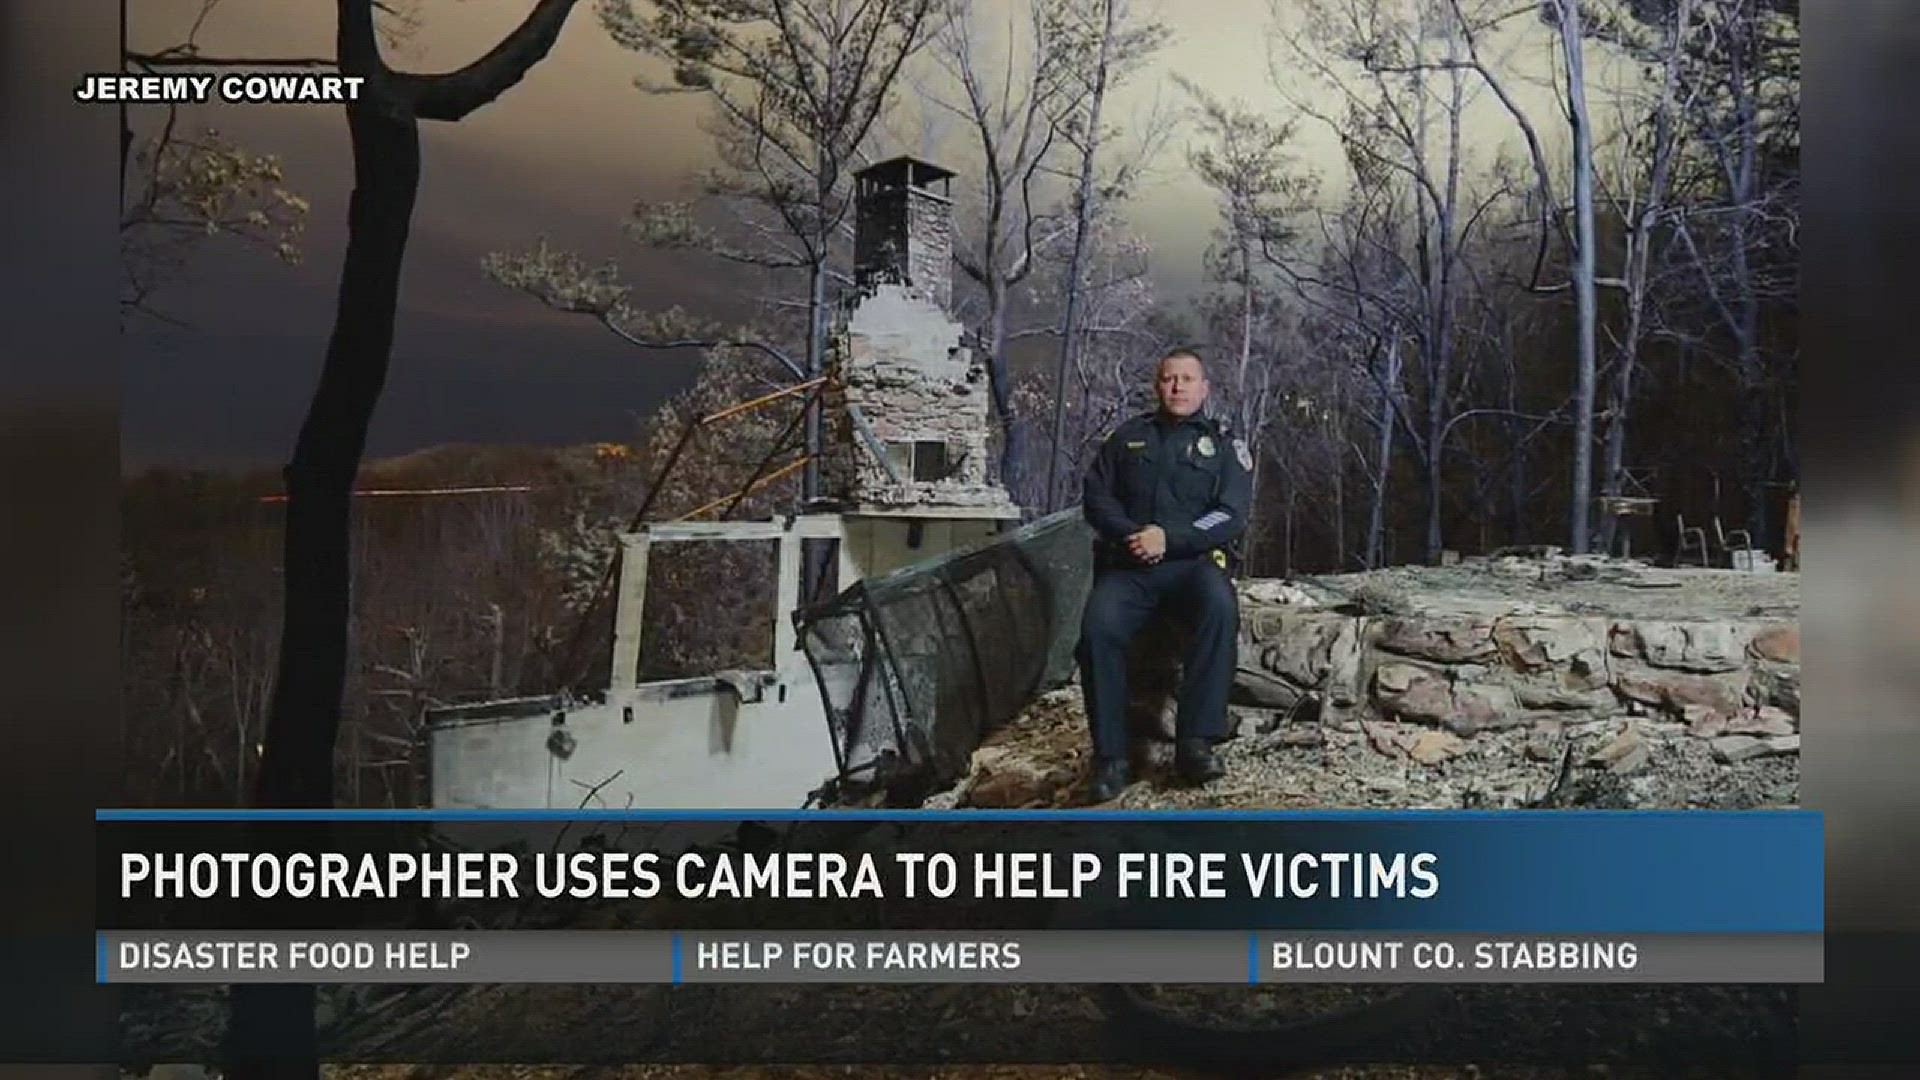 Photographer Jeremy Cowart is depicting Sevier County wildfire victims back at the sites of their former homes and businesses in a powerful presentation.